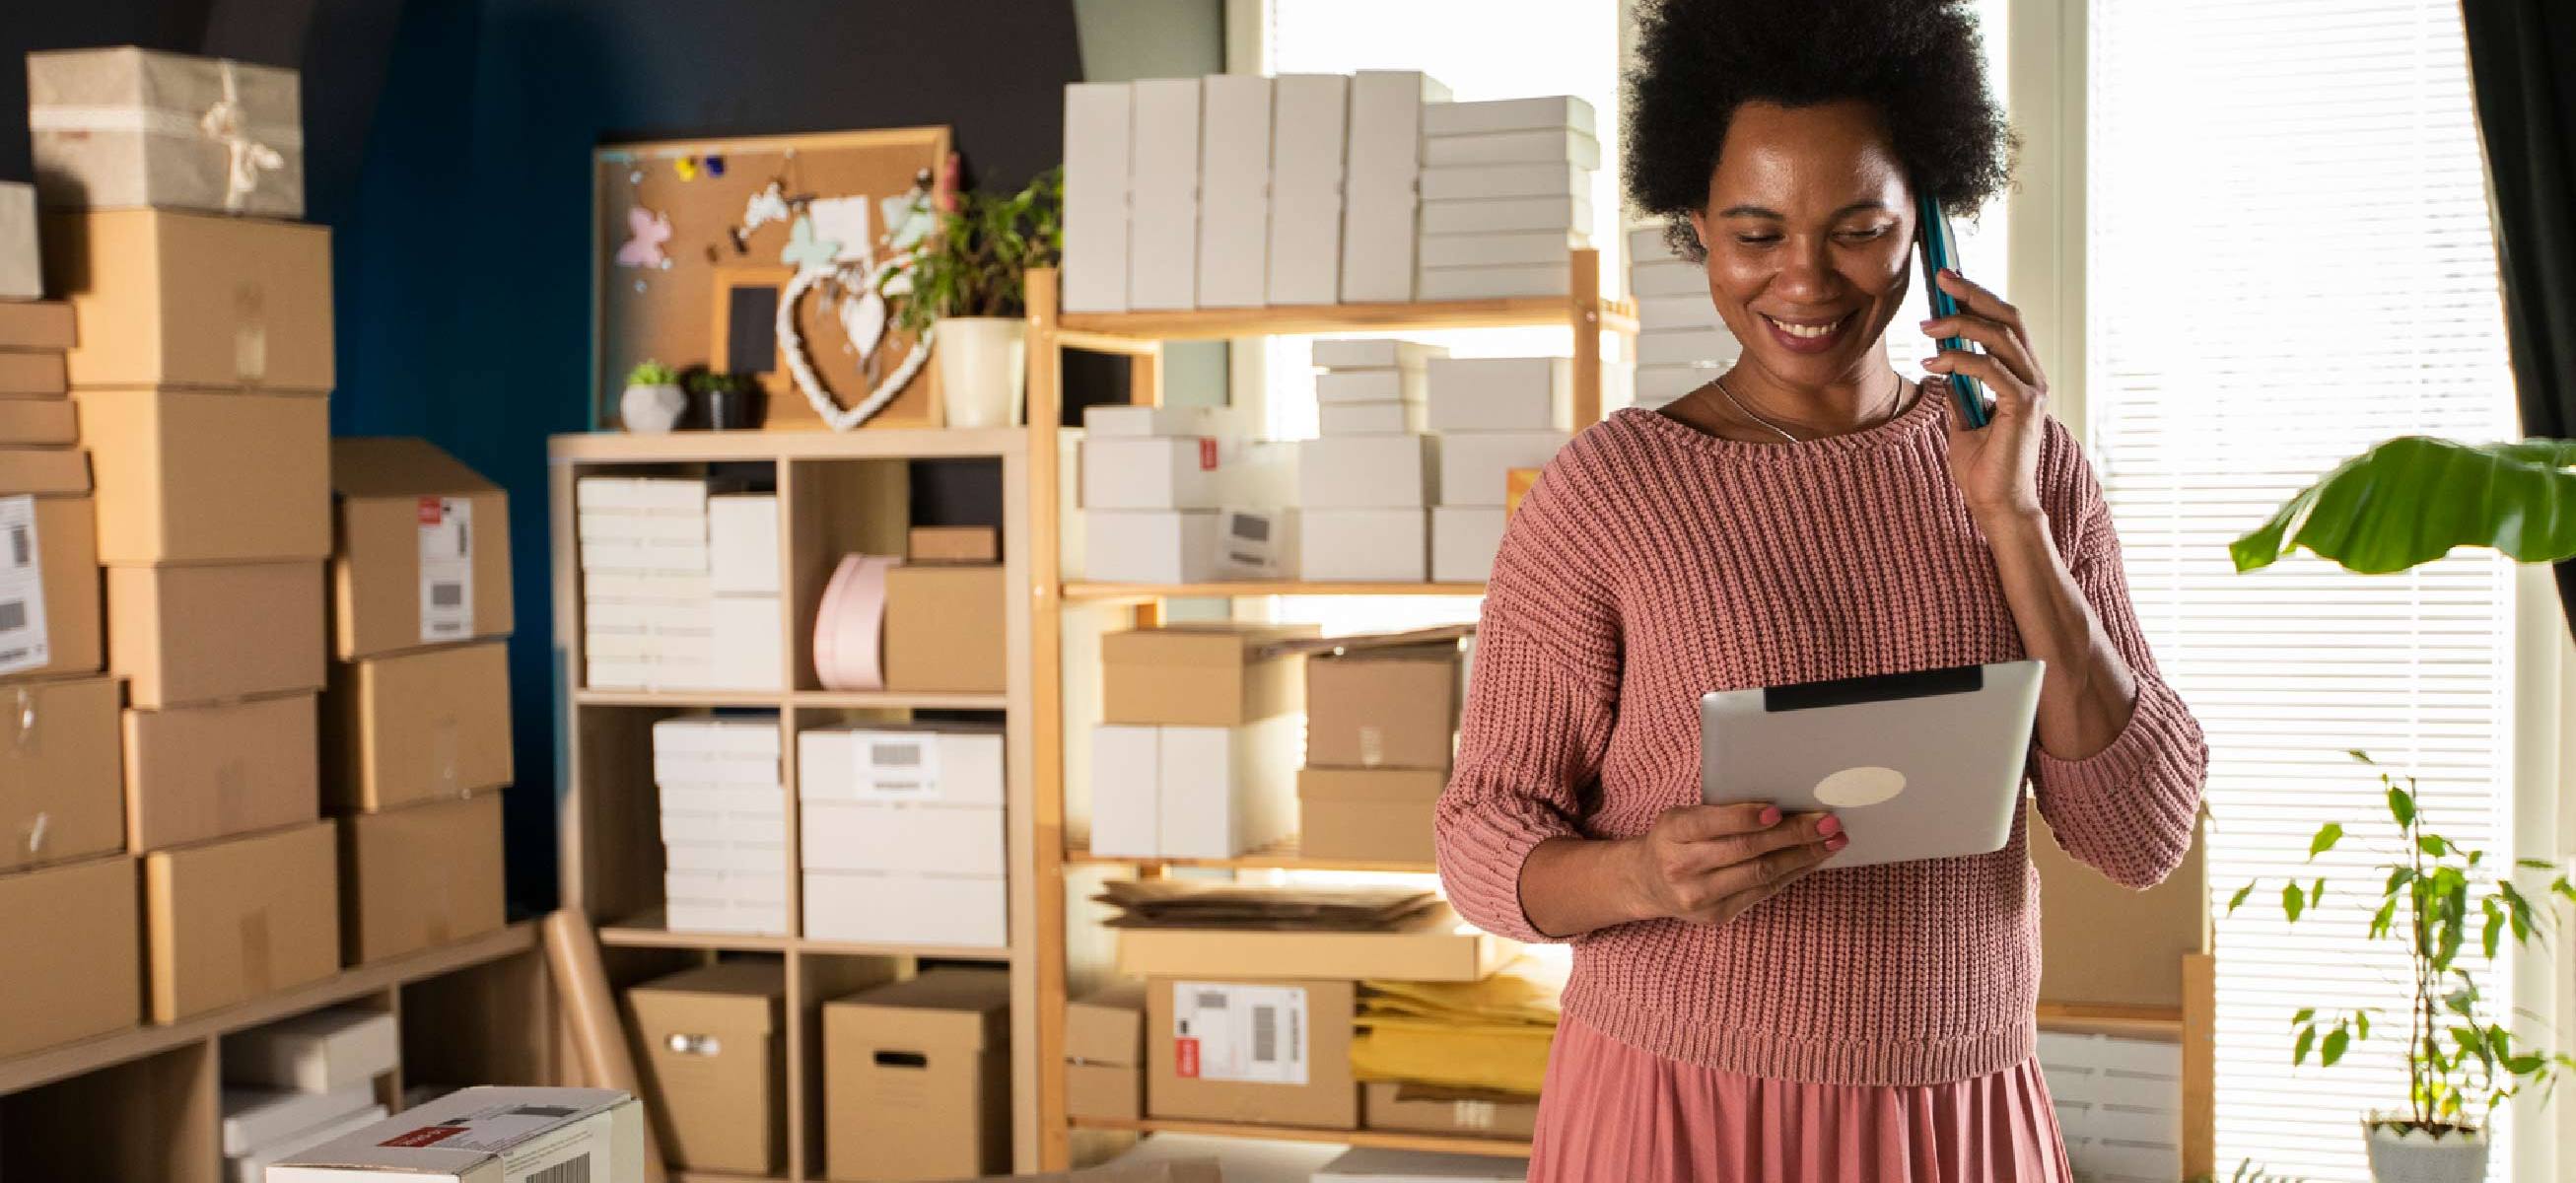 A Black woman and small business owner is in a shop surrounded by packages, looking at her tablet, indicating she might be using the cost of goods sold formula for her accounting.